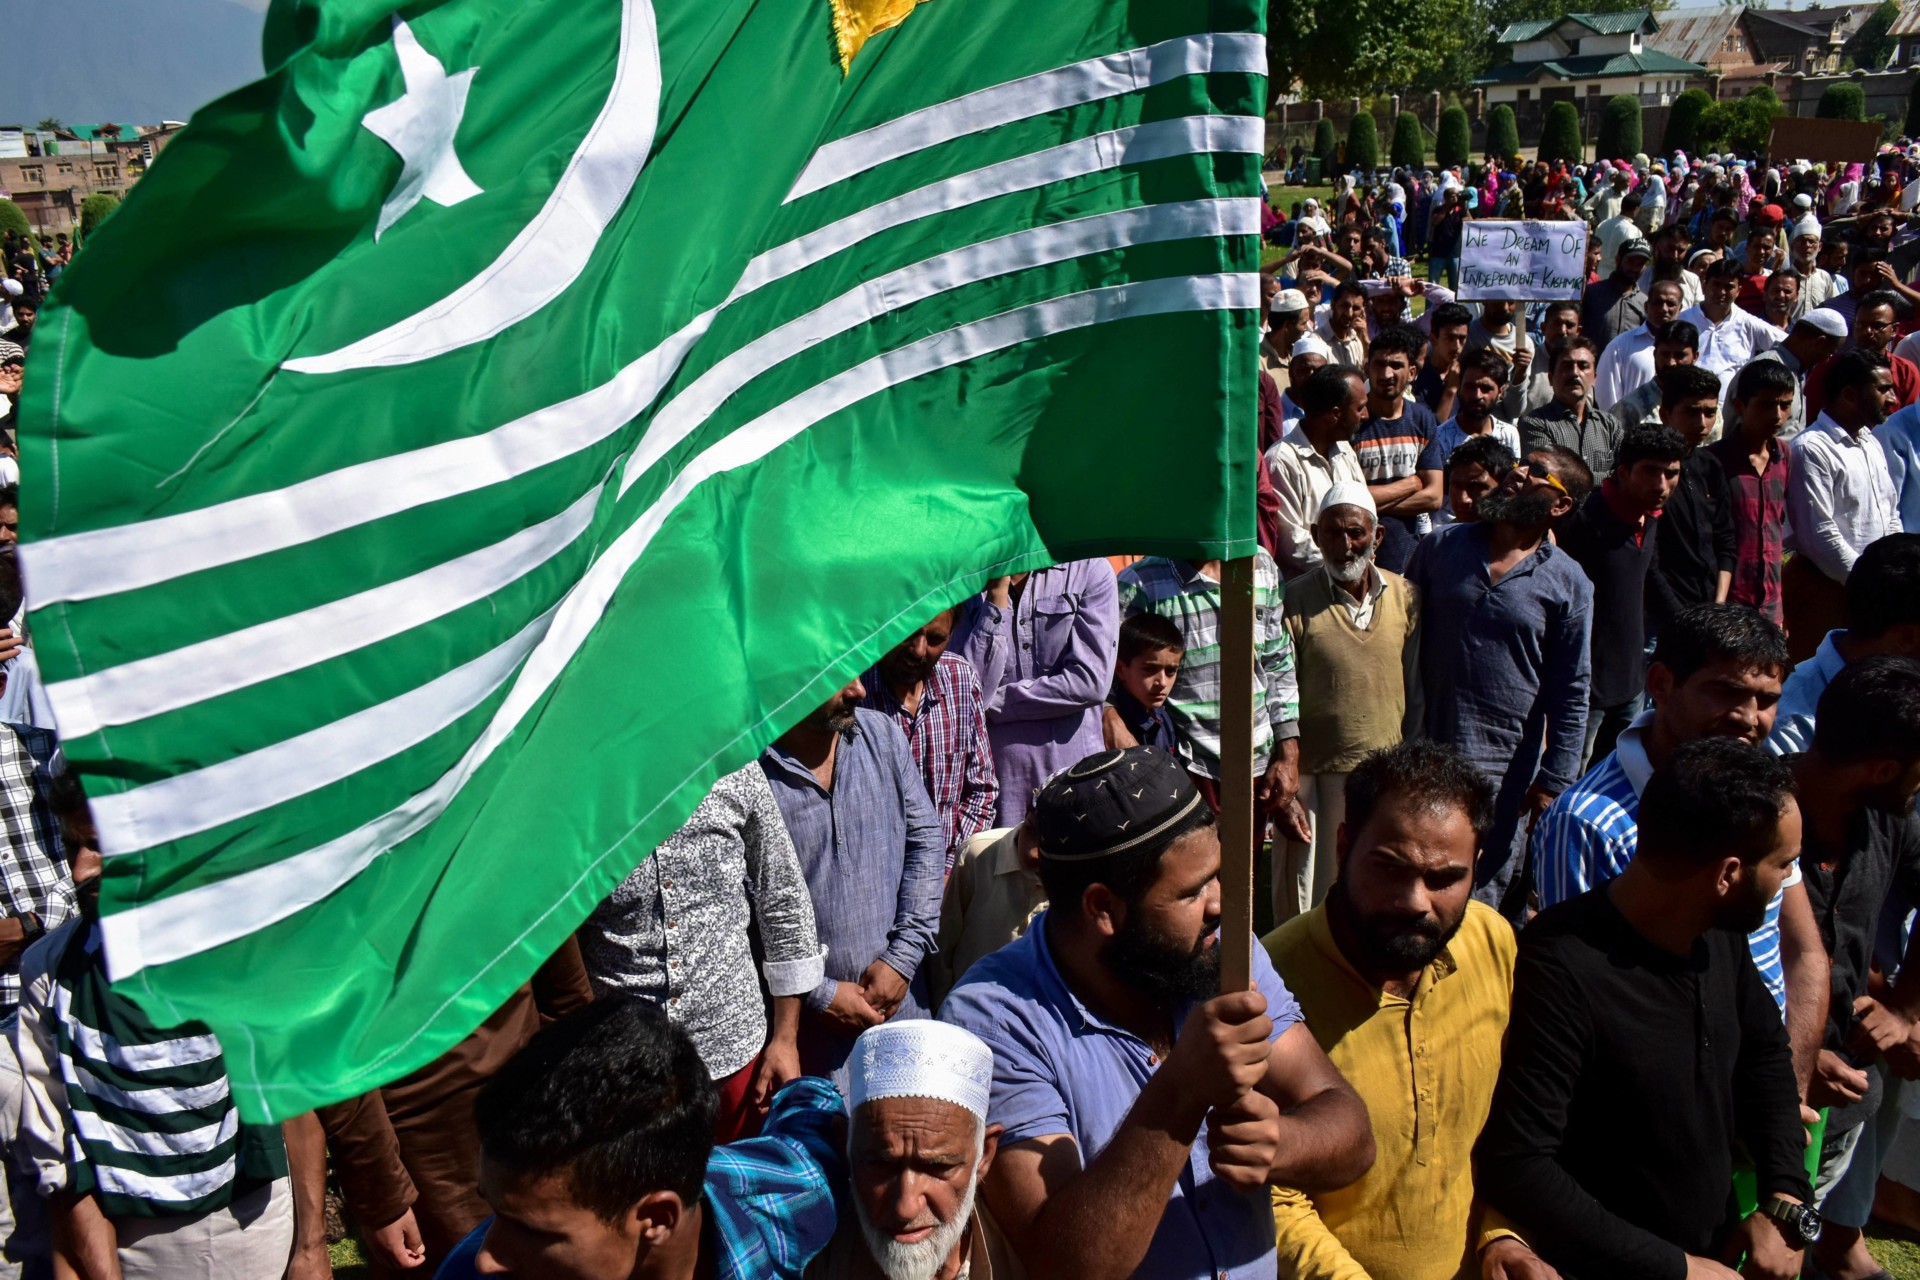 A Kashmir protester holds a flag during the rally.A rally|Nav 56